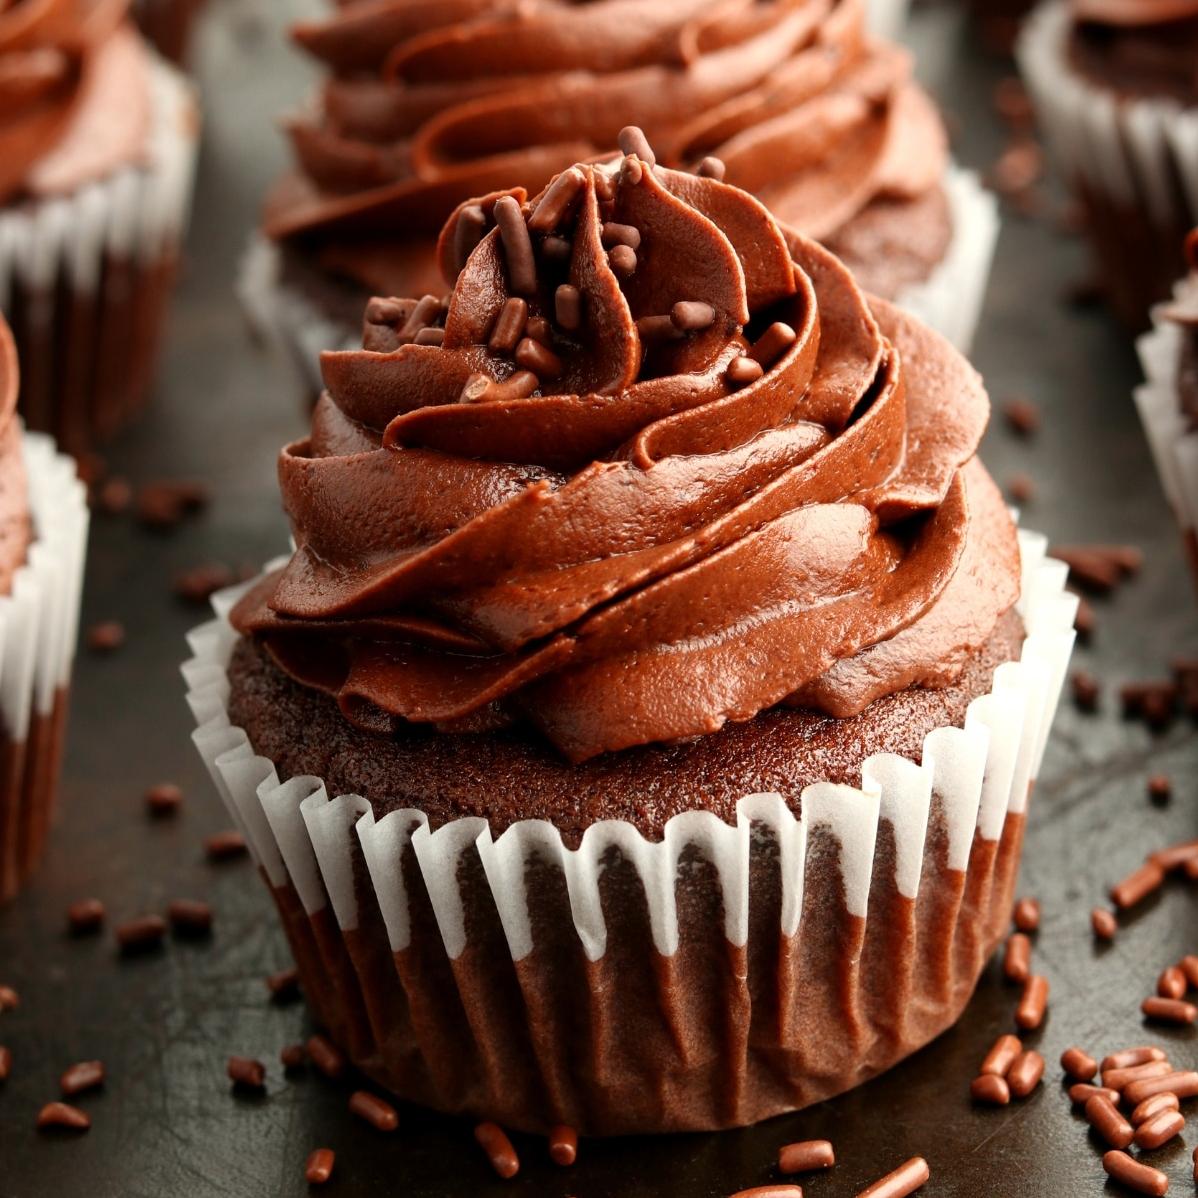  Moist, fluffy, and chocolatey goodness in every bite of these cupcakes!